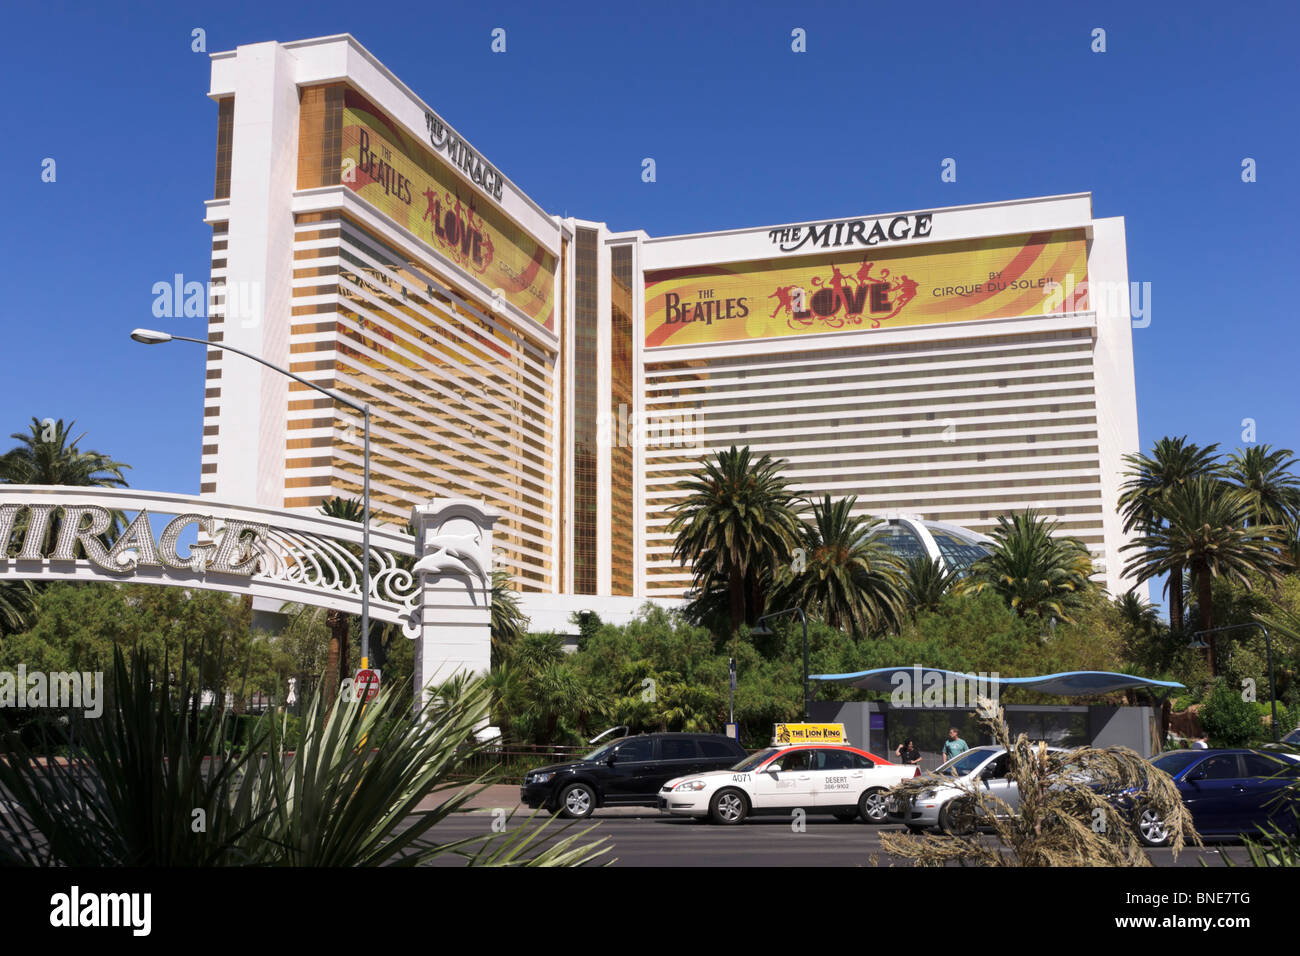 The Mirage, an MGM resort hotel on the Las Vegas strip, with Cirque du Soleil advert Beatles 'Love' show Stock Photo